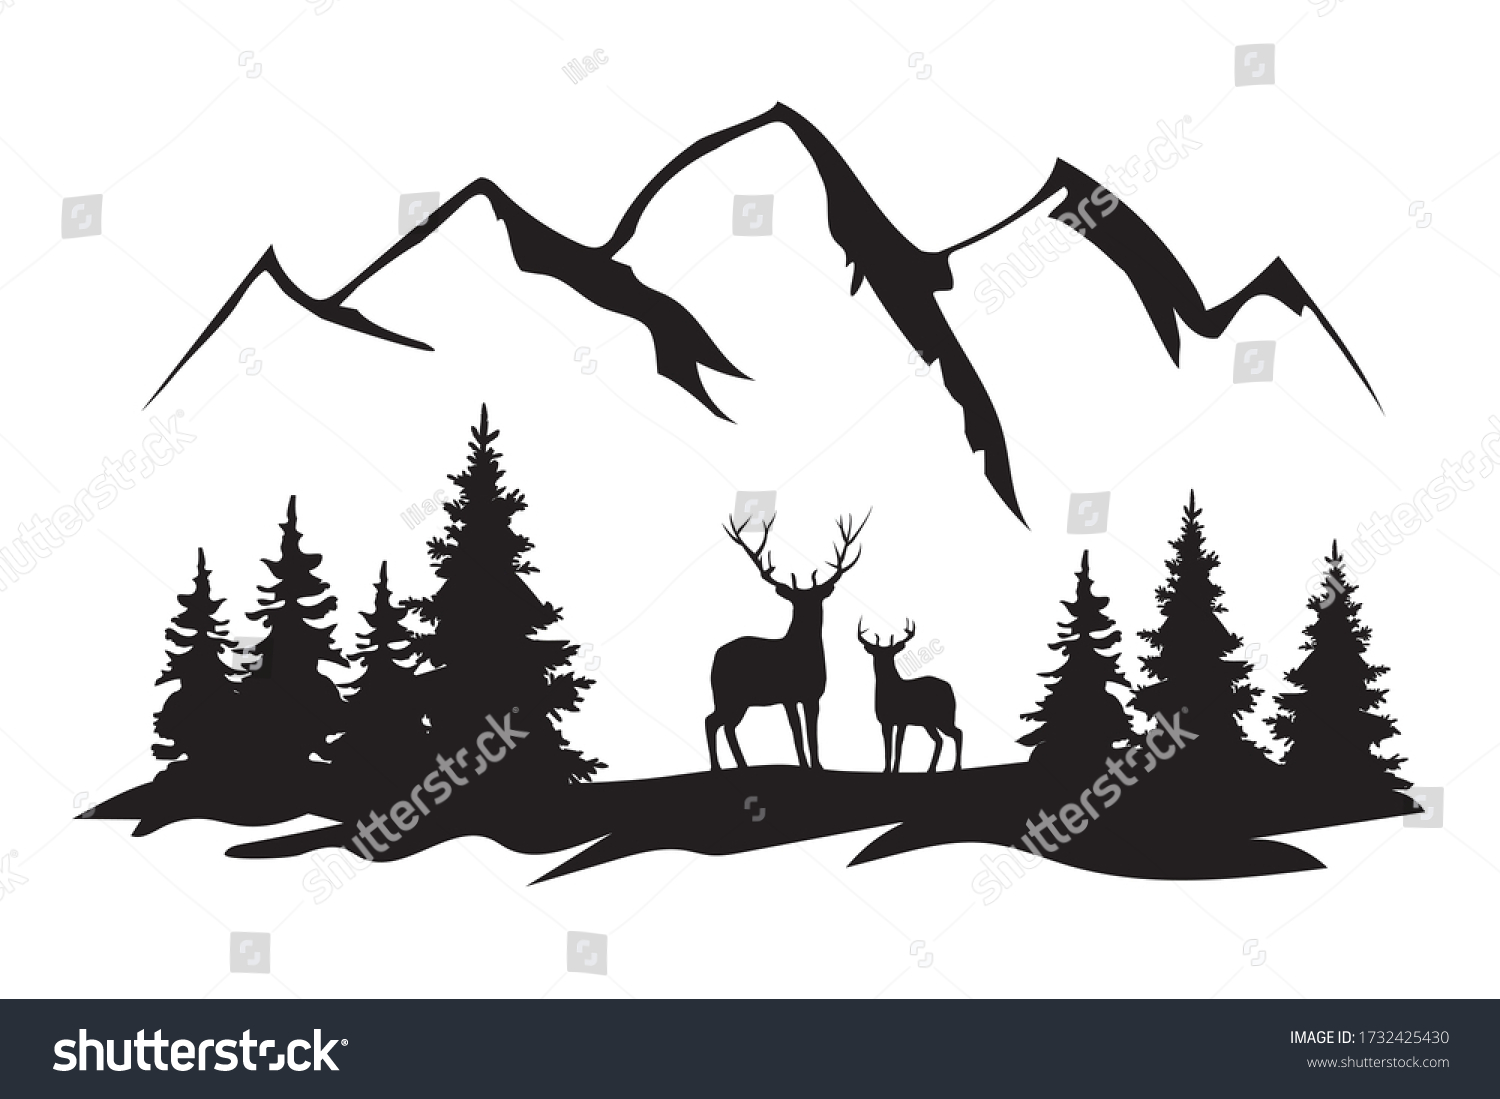 vector illustration of mountains, forest,deer. travel, camping, nature, wilderness background.  #1732425430